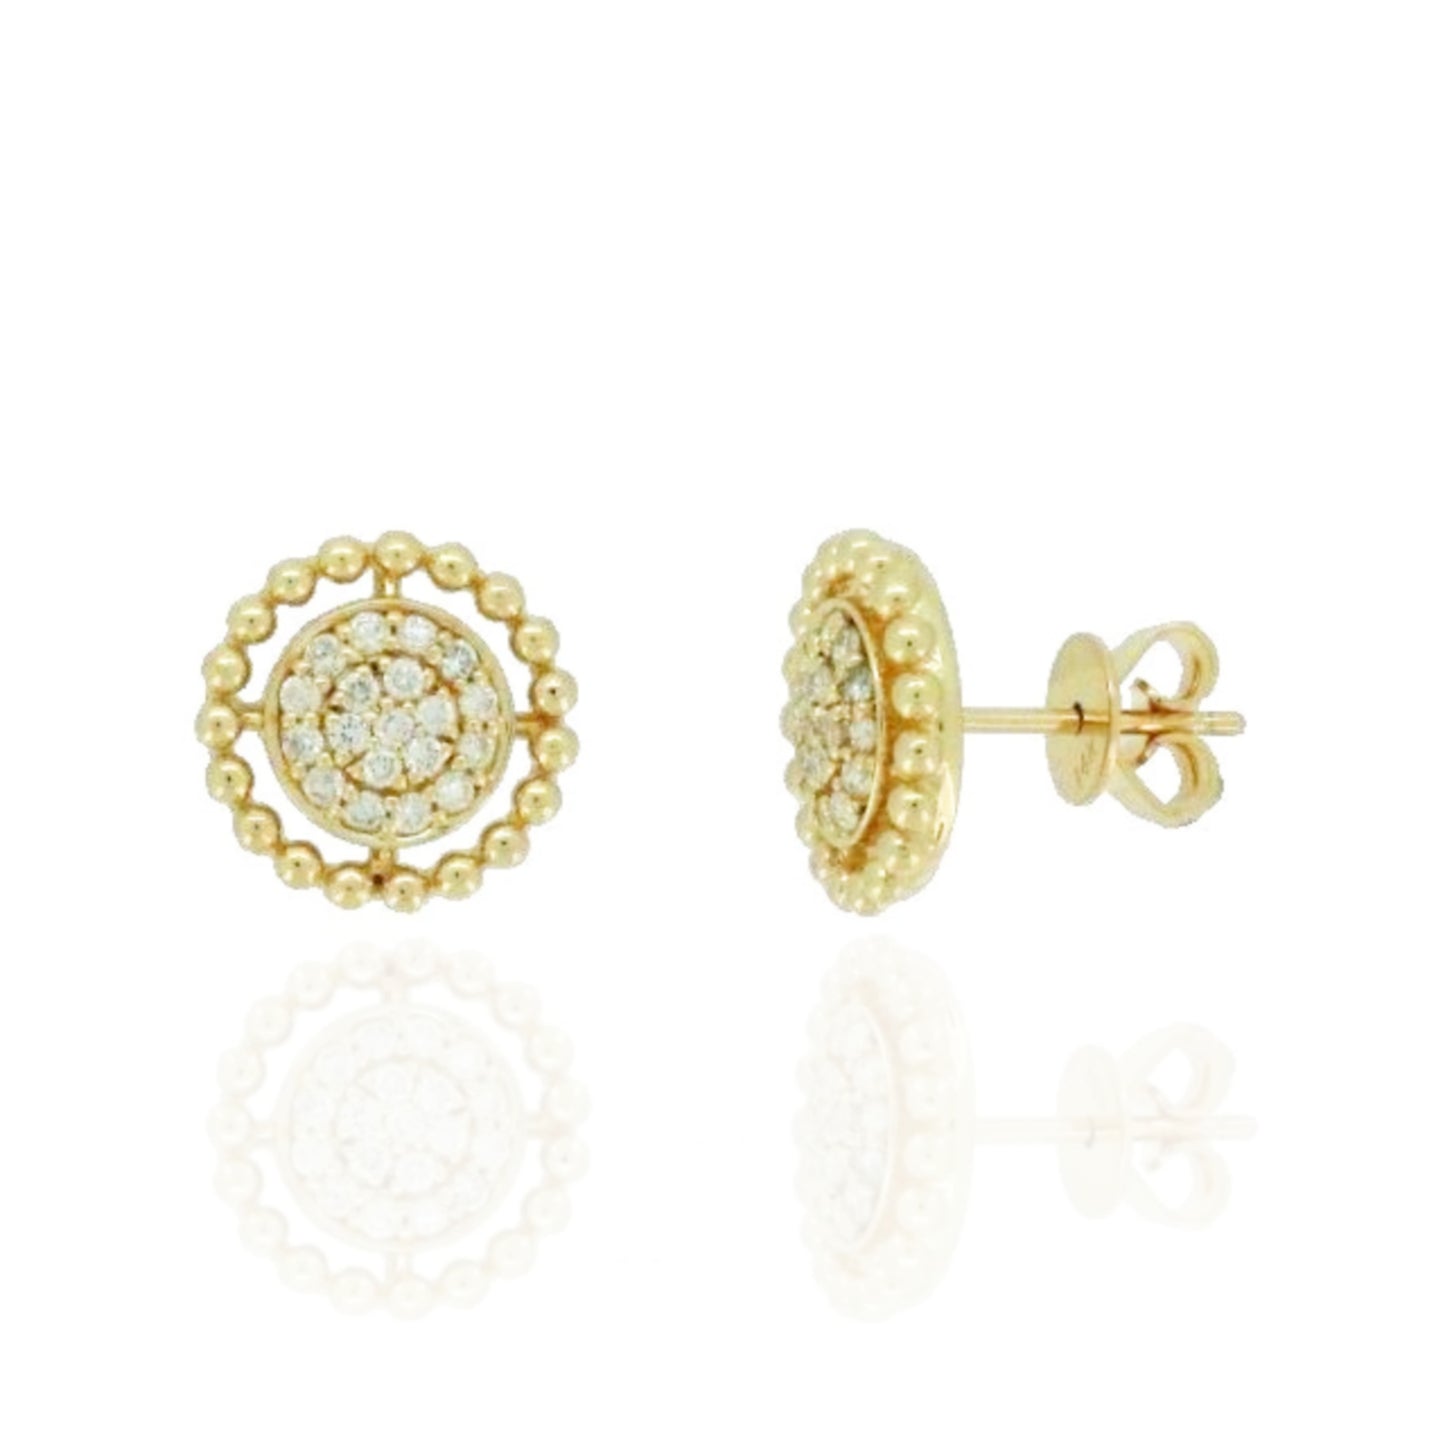 14K Gold Circle With Micropave Diamonds Stud Earrings - HK Jewels